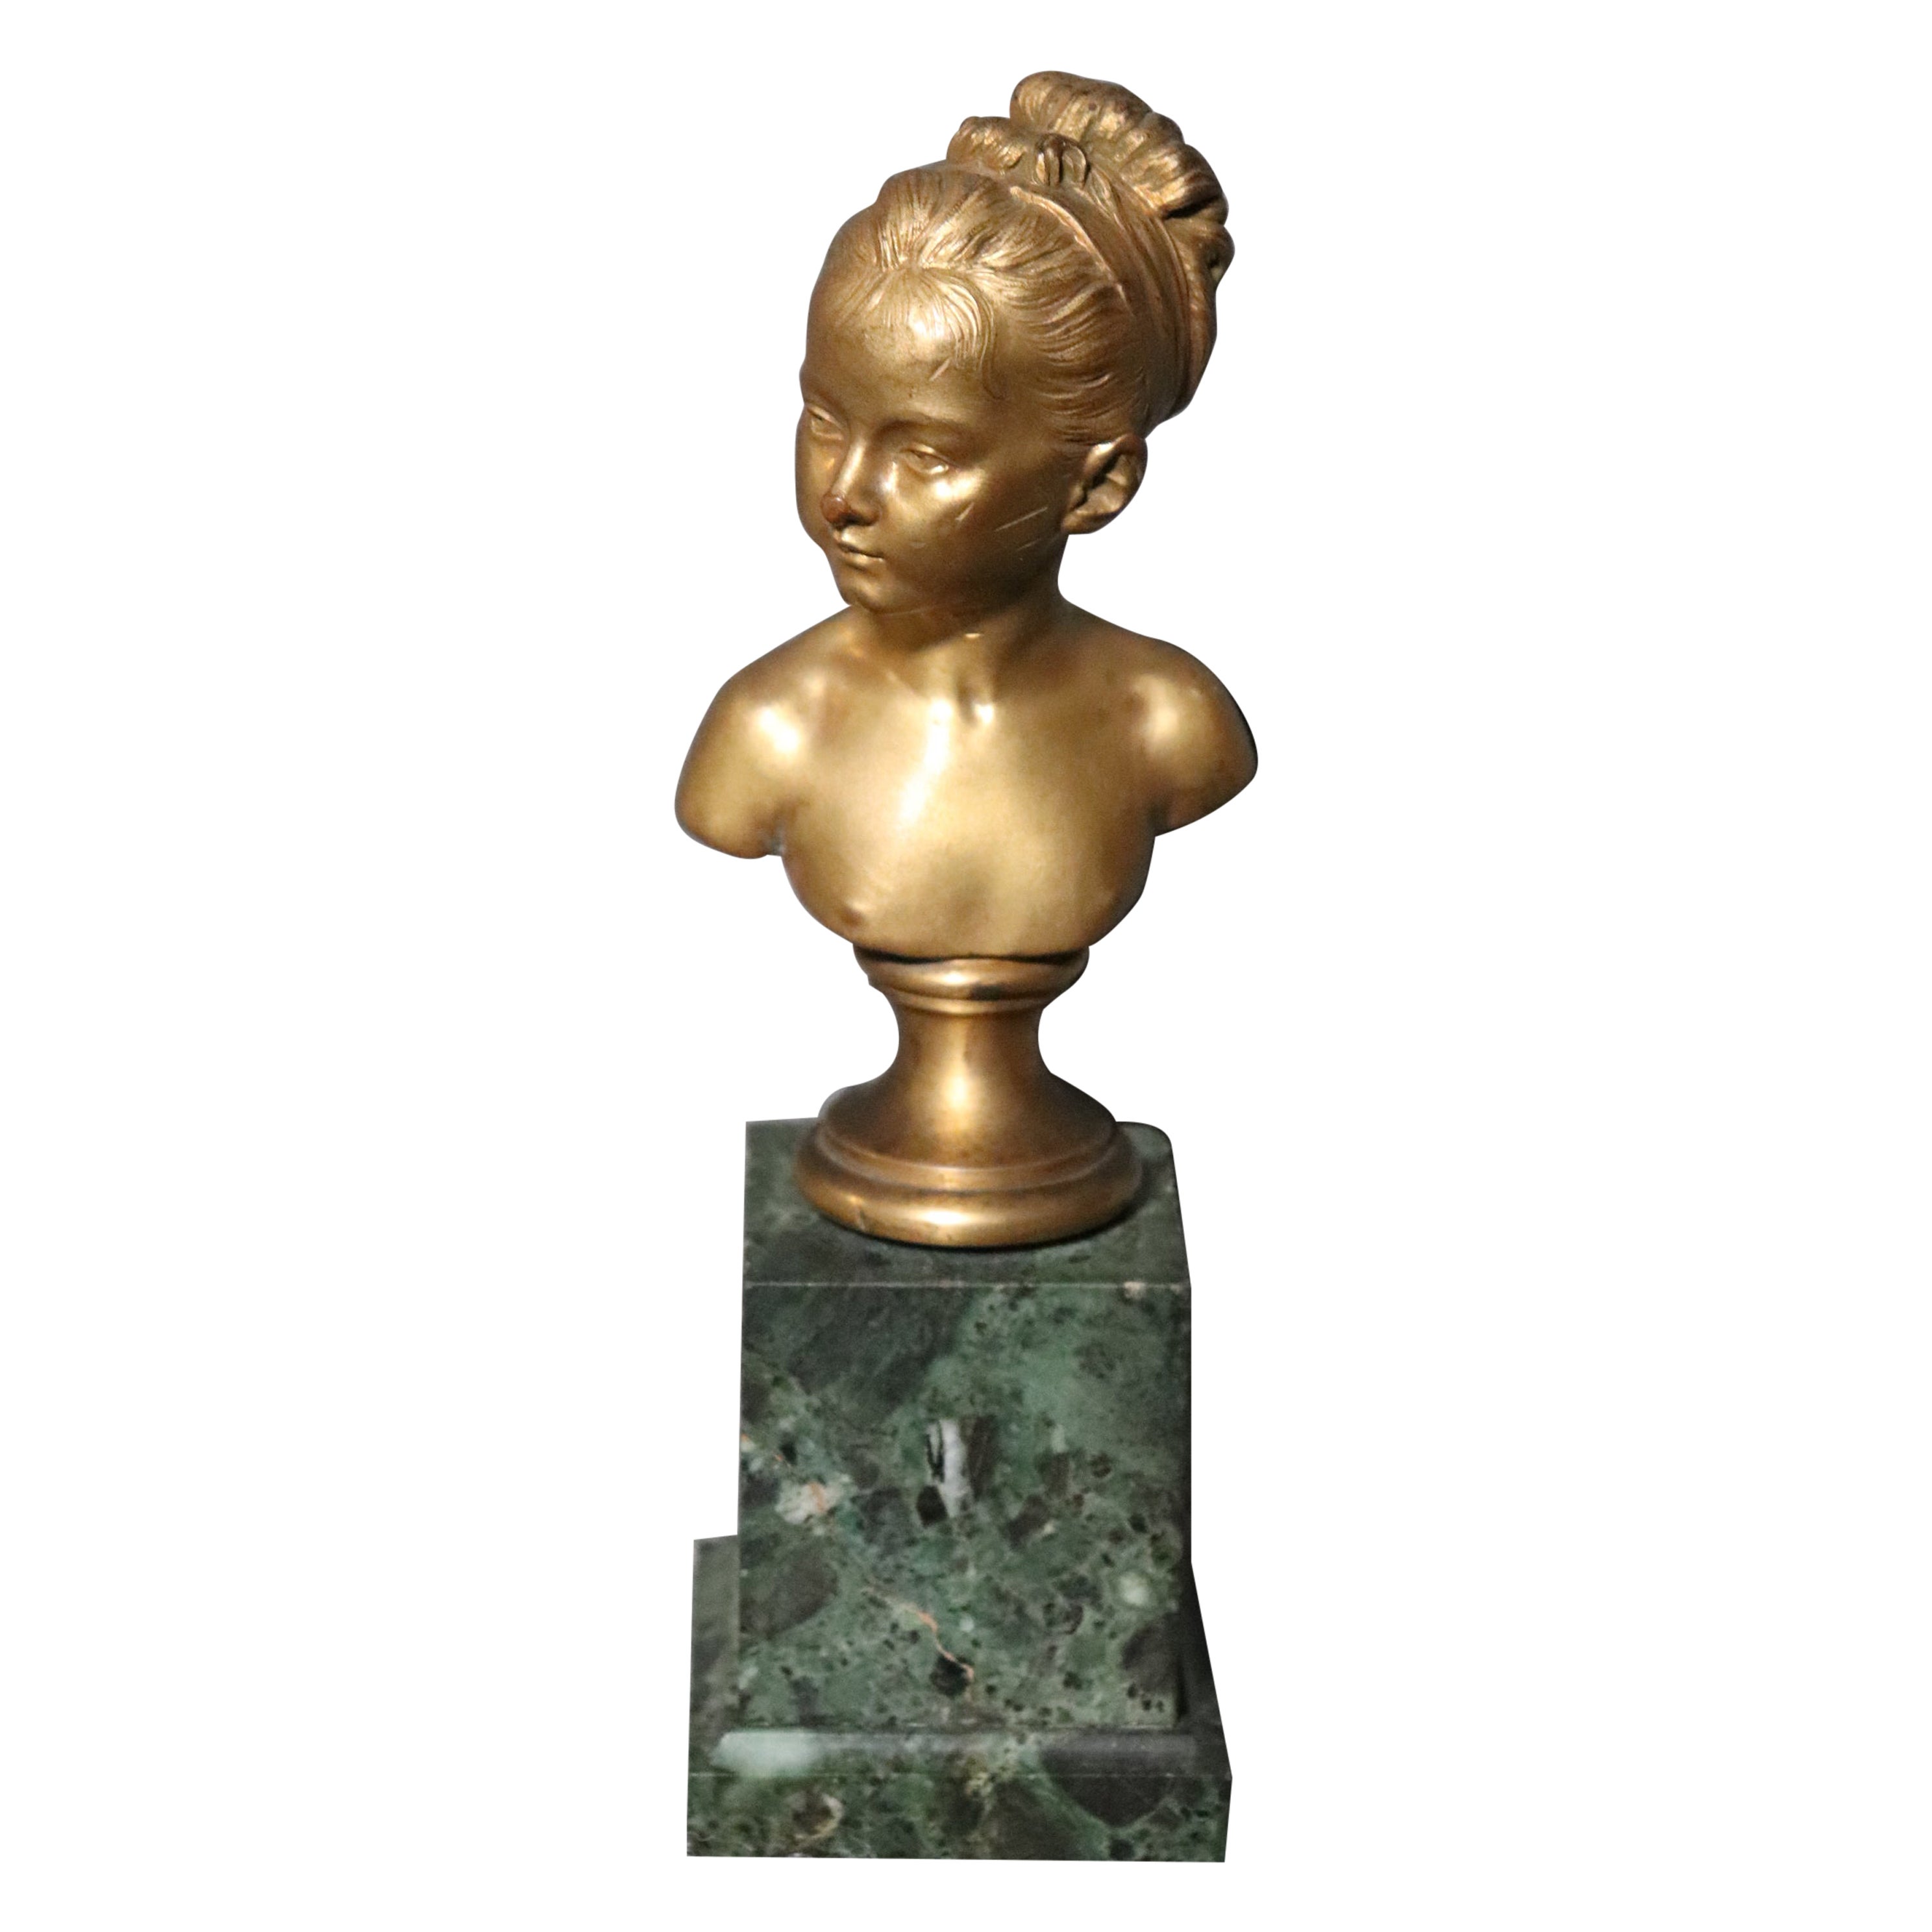 Ormolu & Marble Bust of Louise Brogniart After Houdon Signed Thiebaut Freres